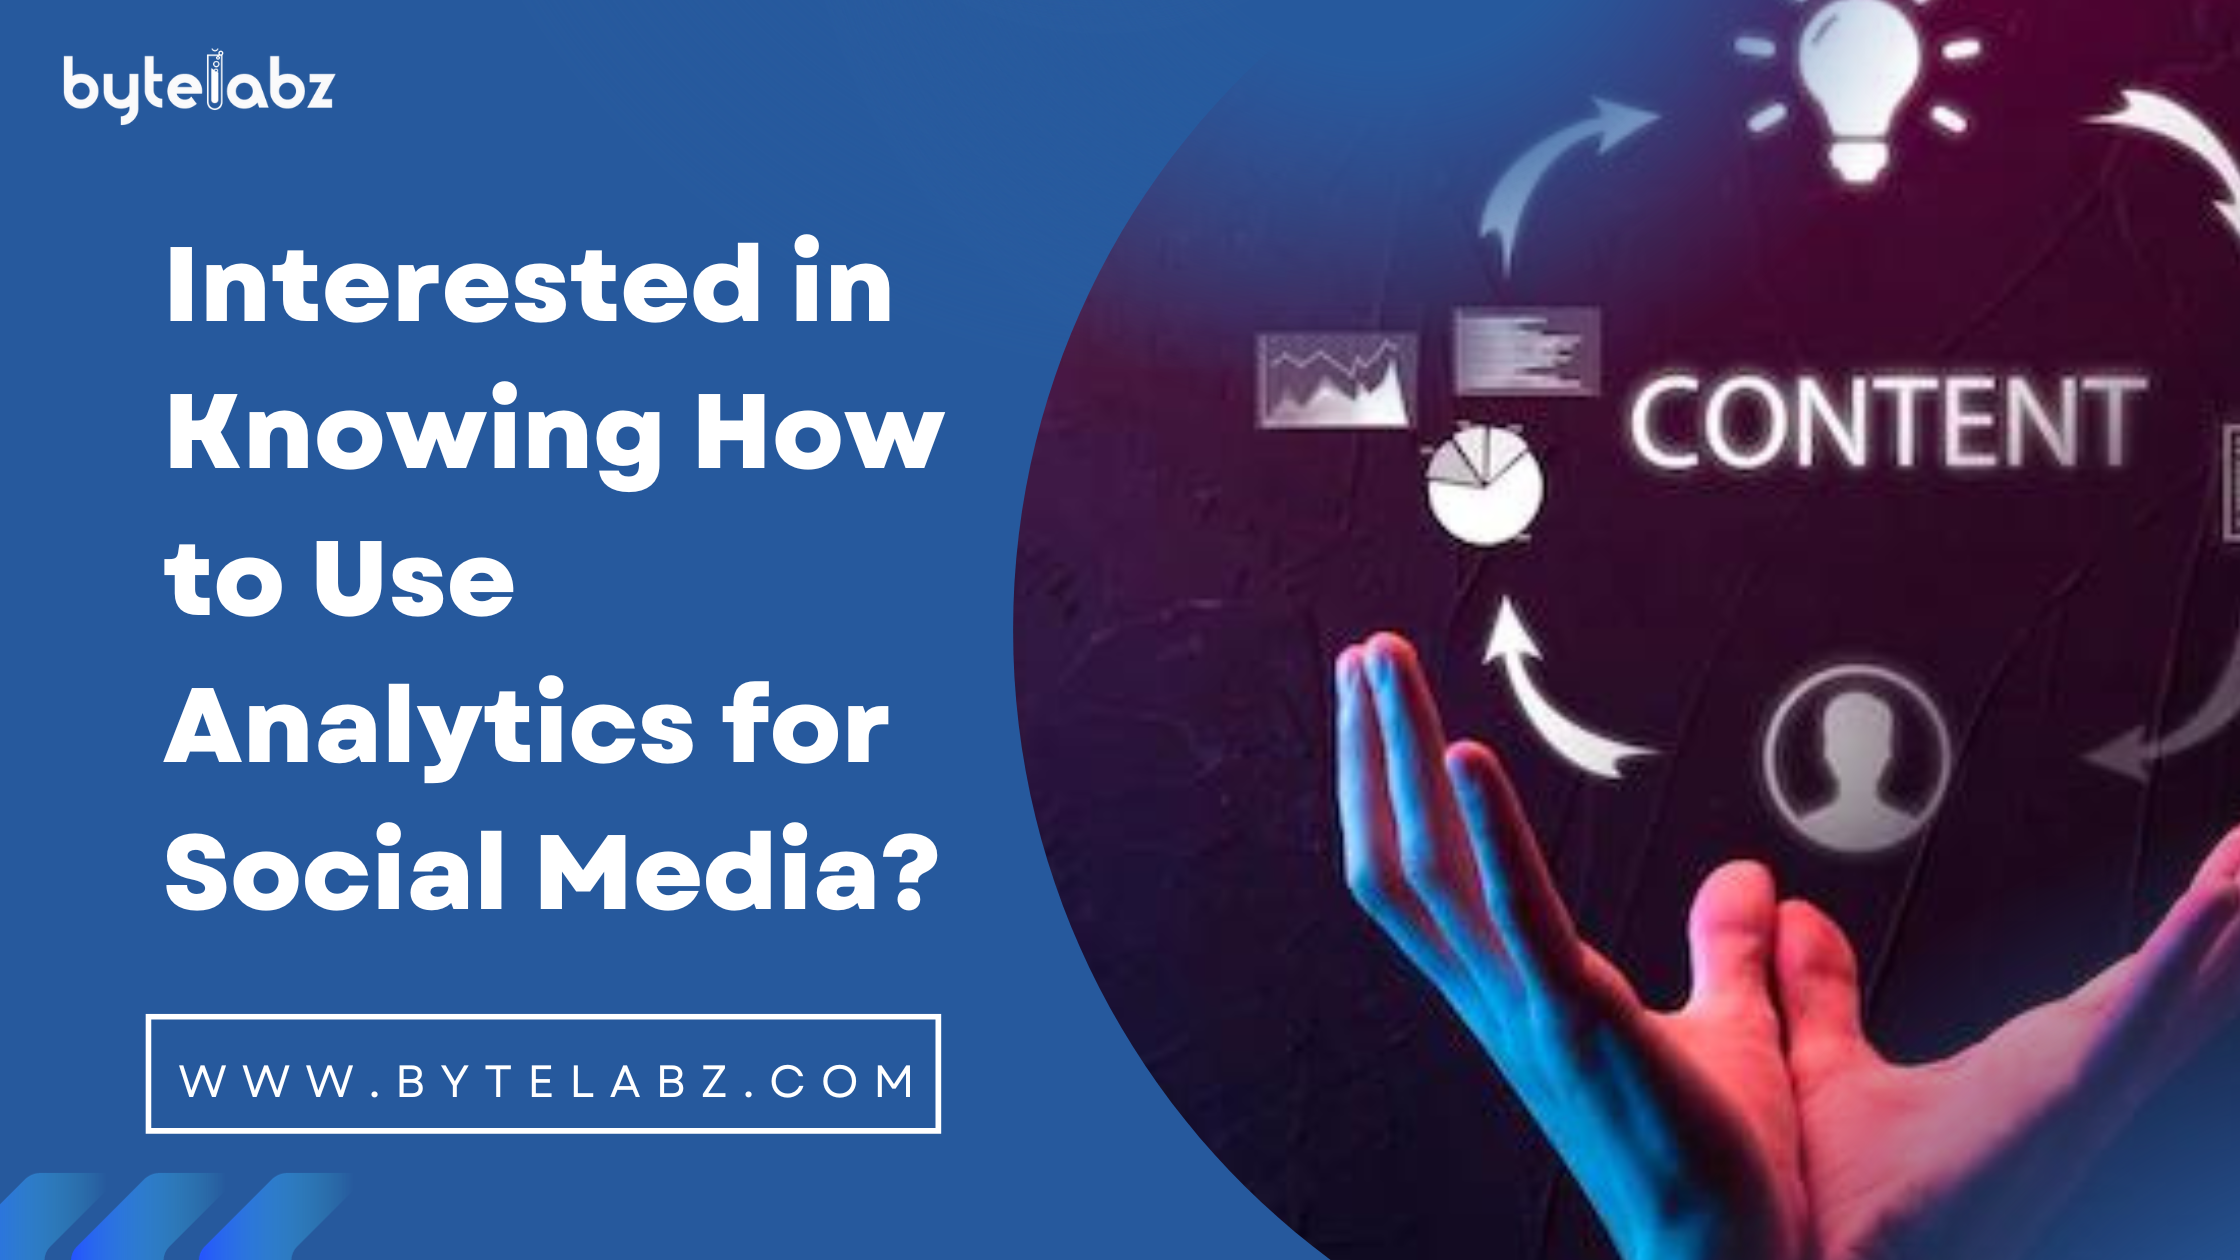 Interested in Knowing How to Use Analytics for Social Media